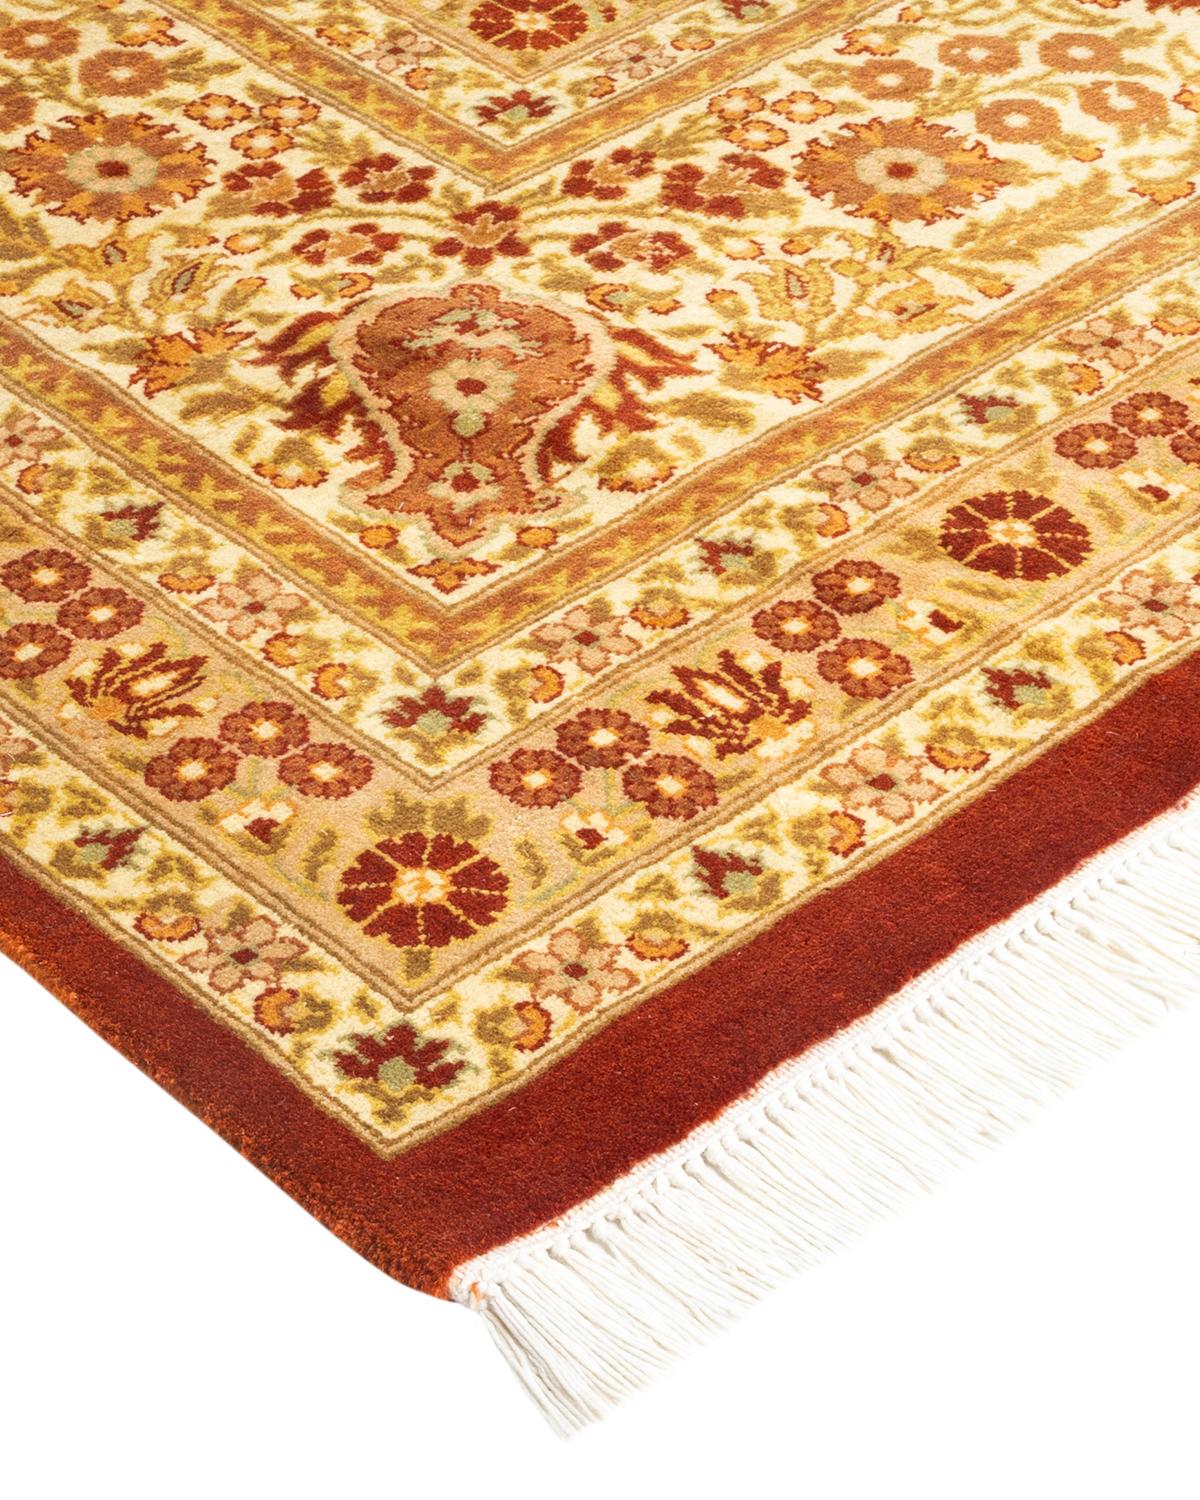 Vibrance rugs epitomize classic with a twist: traditional patterns overdyed in brilliant color. Each Hand-Knotted rug is washed in a 100%-natural botanical dye that reveals hidden nuances in the designs. These are rugs that transcend trends, and